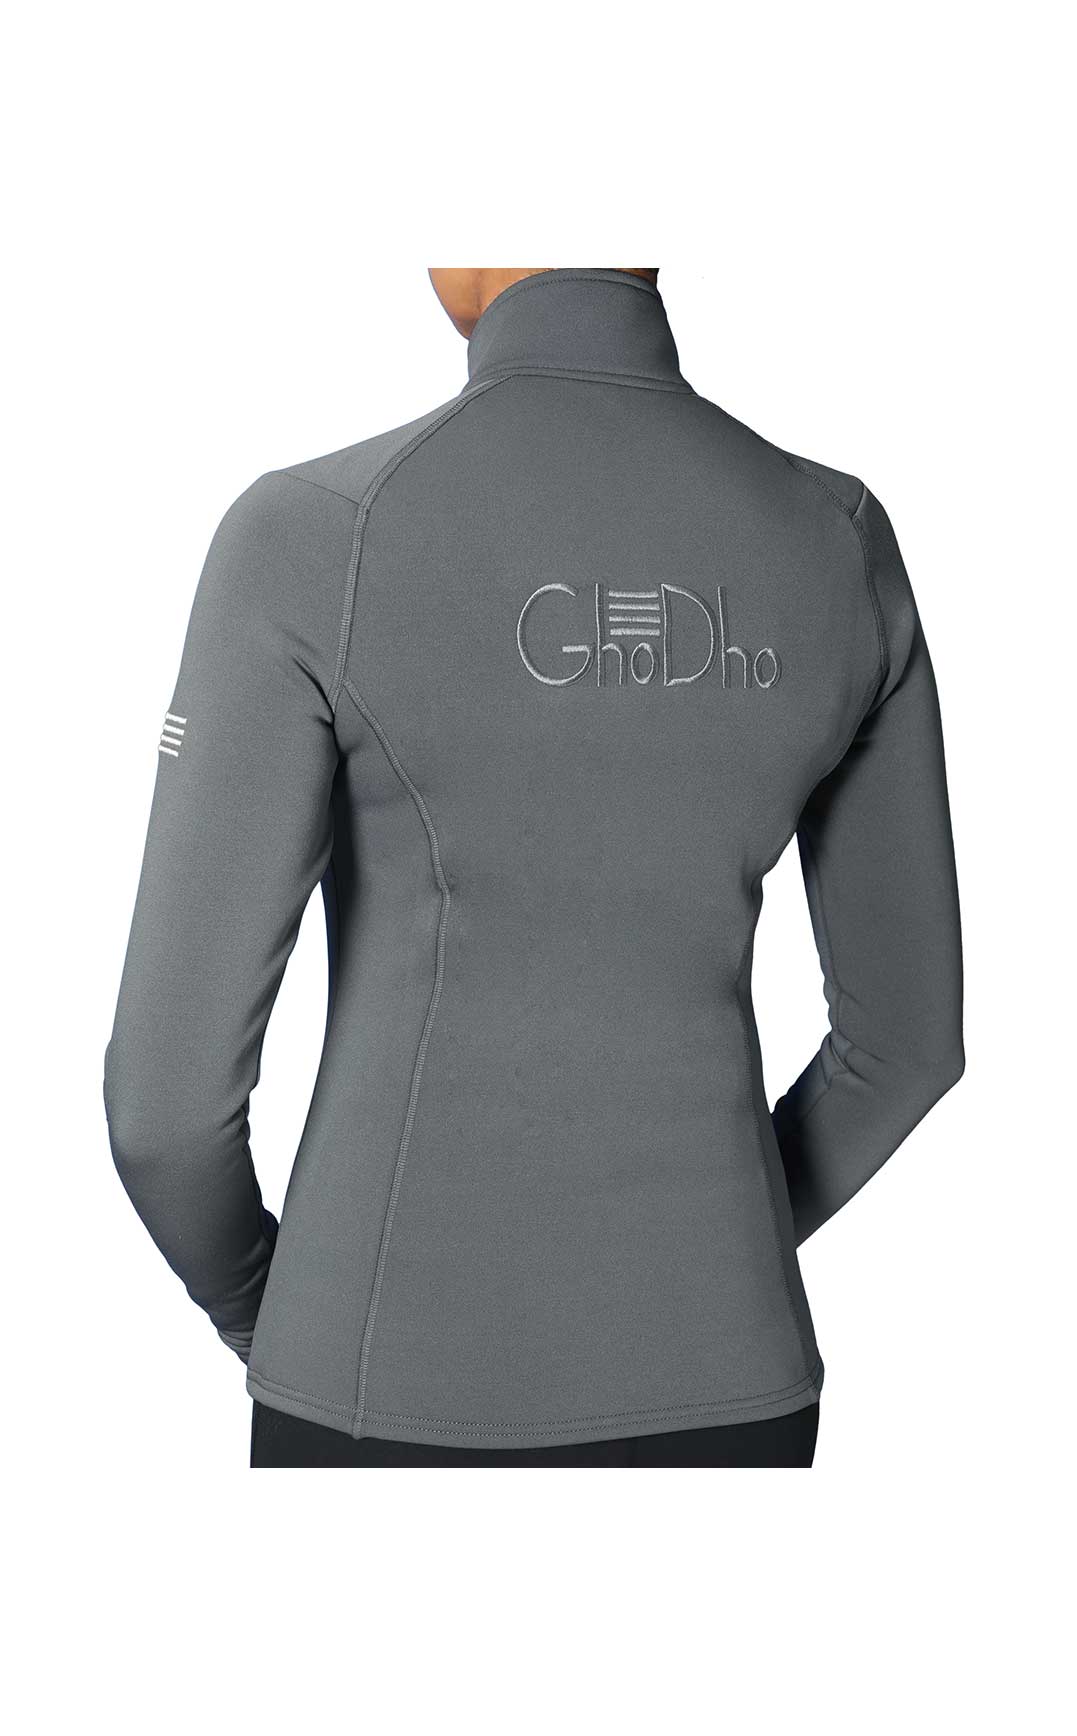 GhoDho Shirt GhoDho- Eclipse Jacket equestrian team apparel online tack store mobile tack store custom farm apparel custom show stable clothing equestrian lifestyle horse show clothing riding clothes horses equestrian tack store